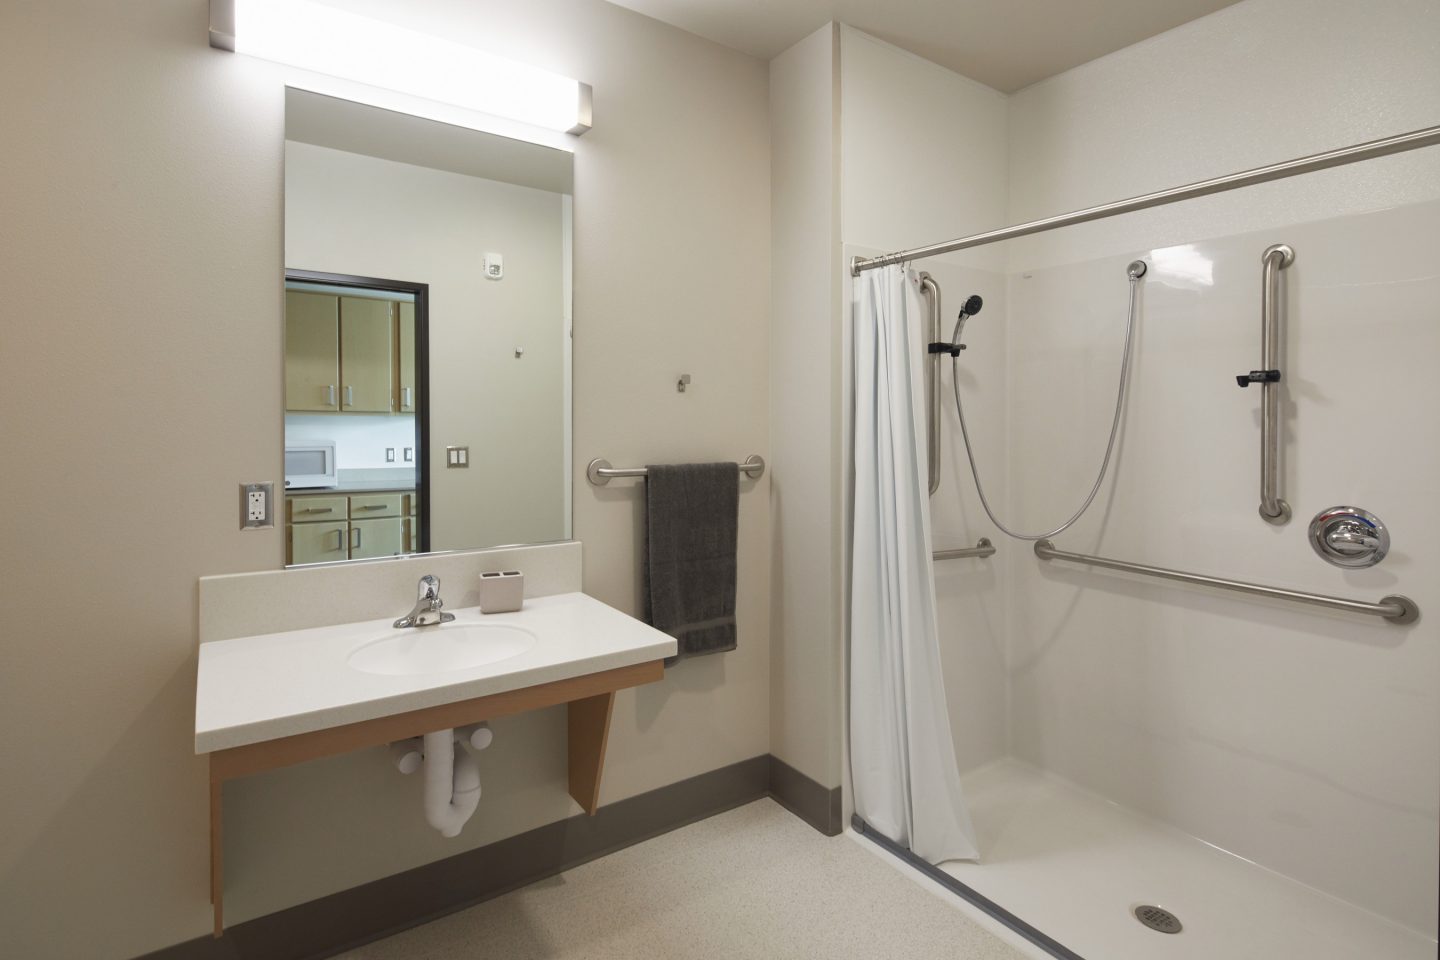 Brightly Lit Bathrooms Have Large Walk-In Showers And Grab Bars.